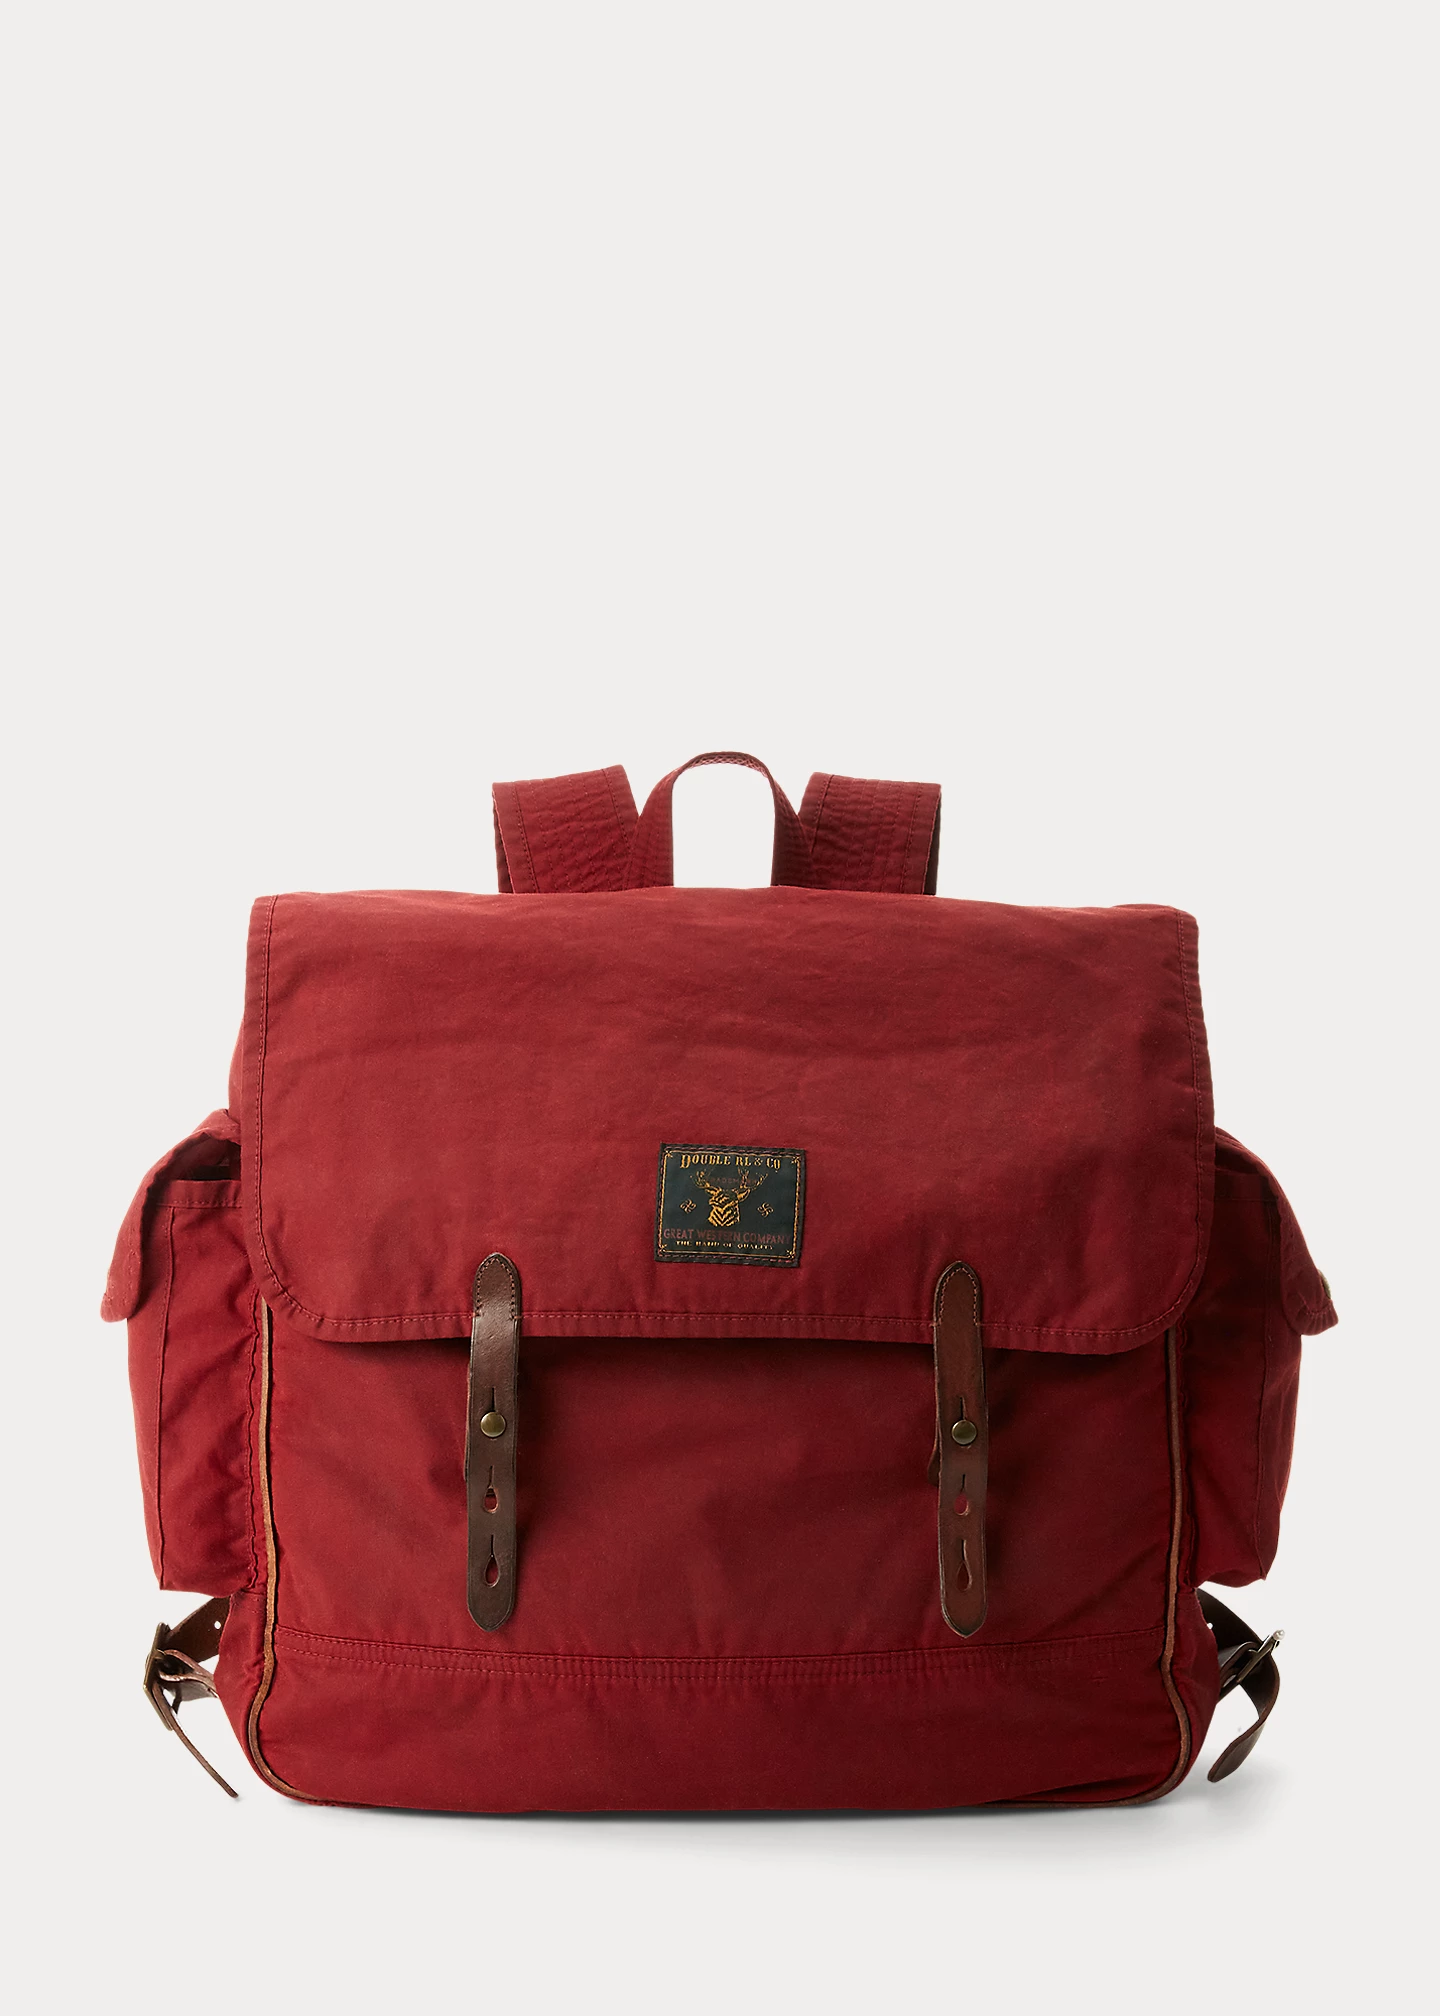 Brand bag Leather-Trim Oilcloth Backpack-,$78.43